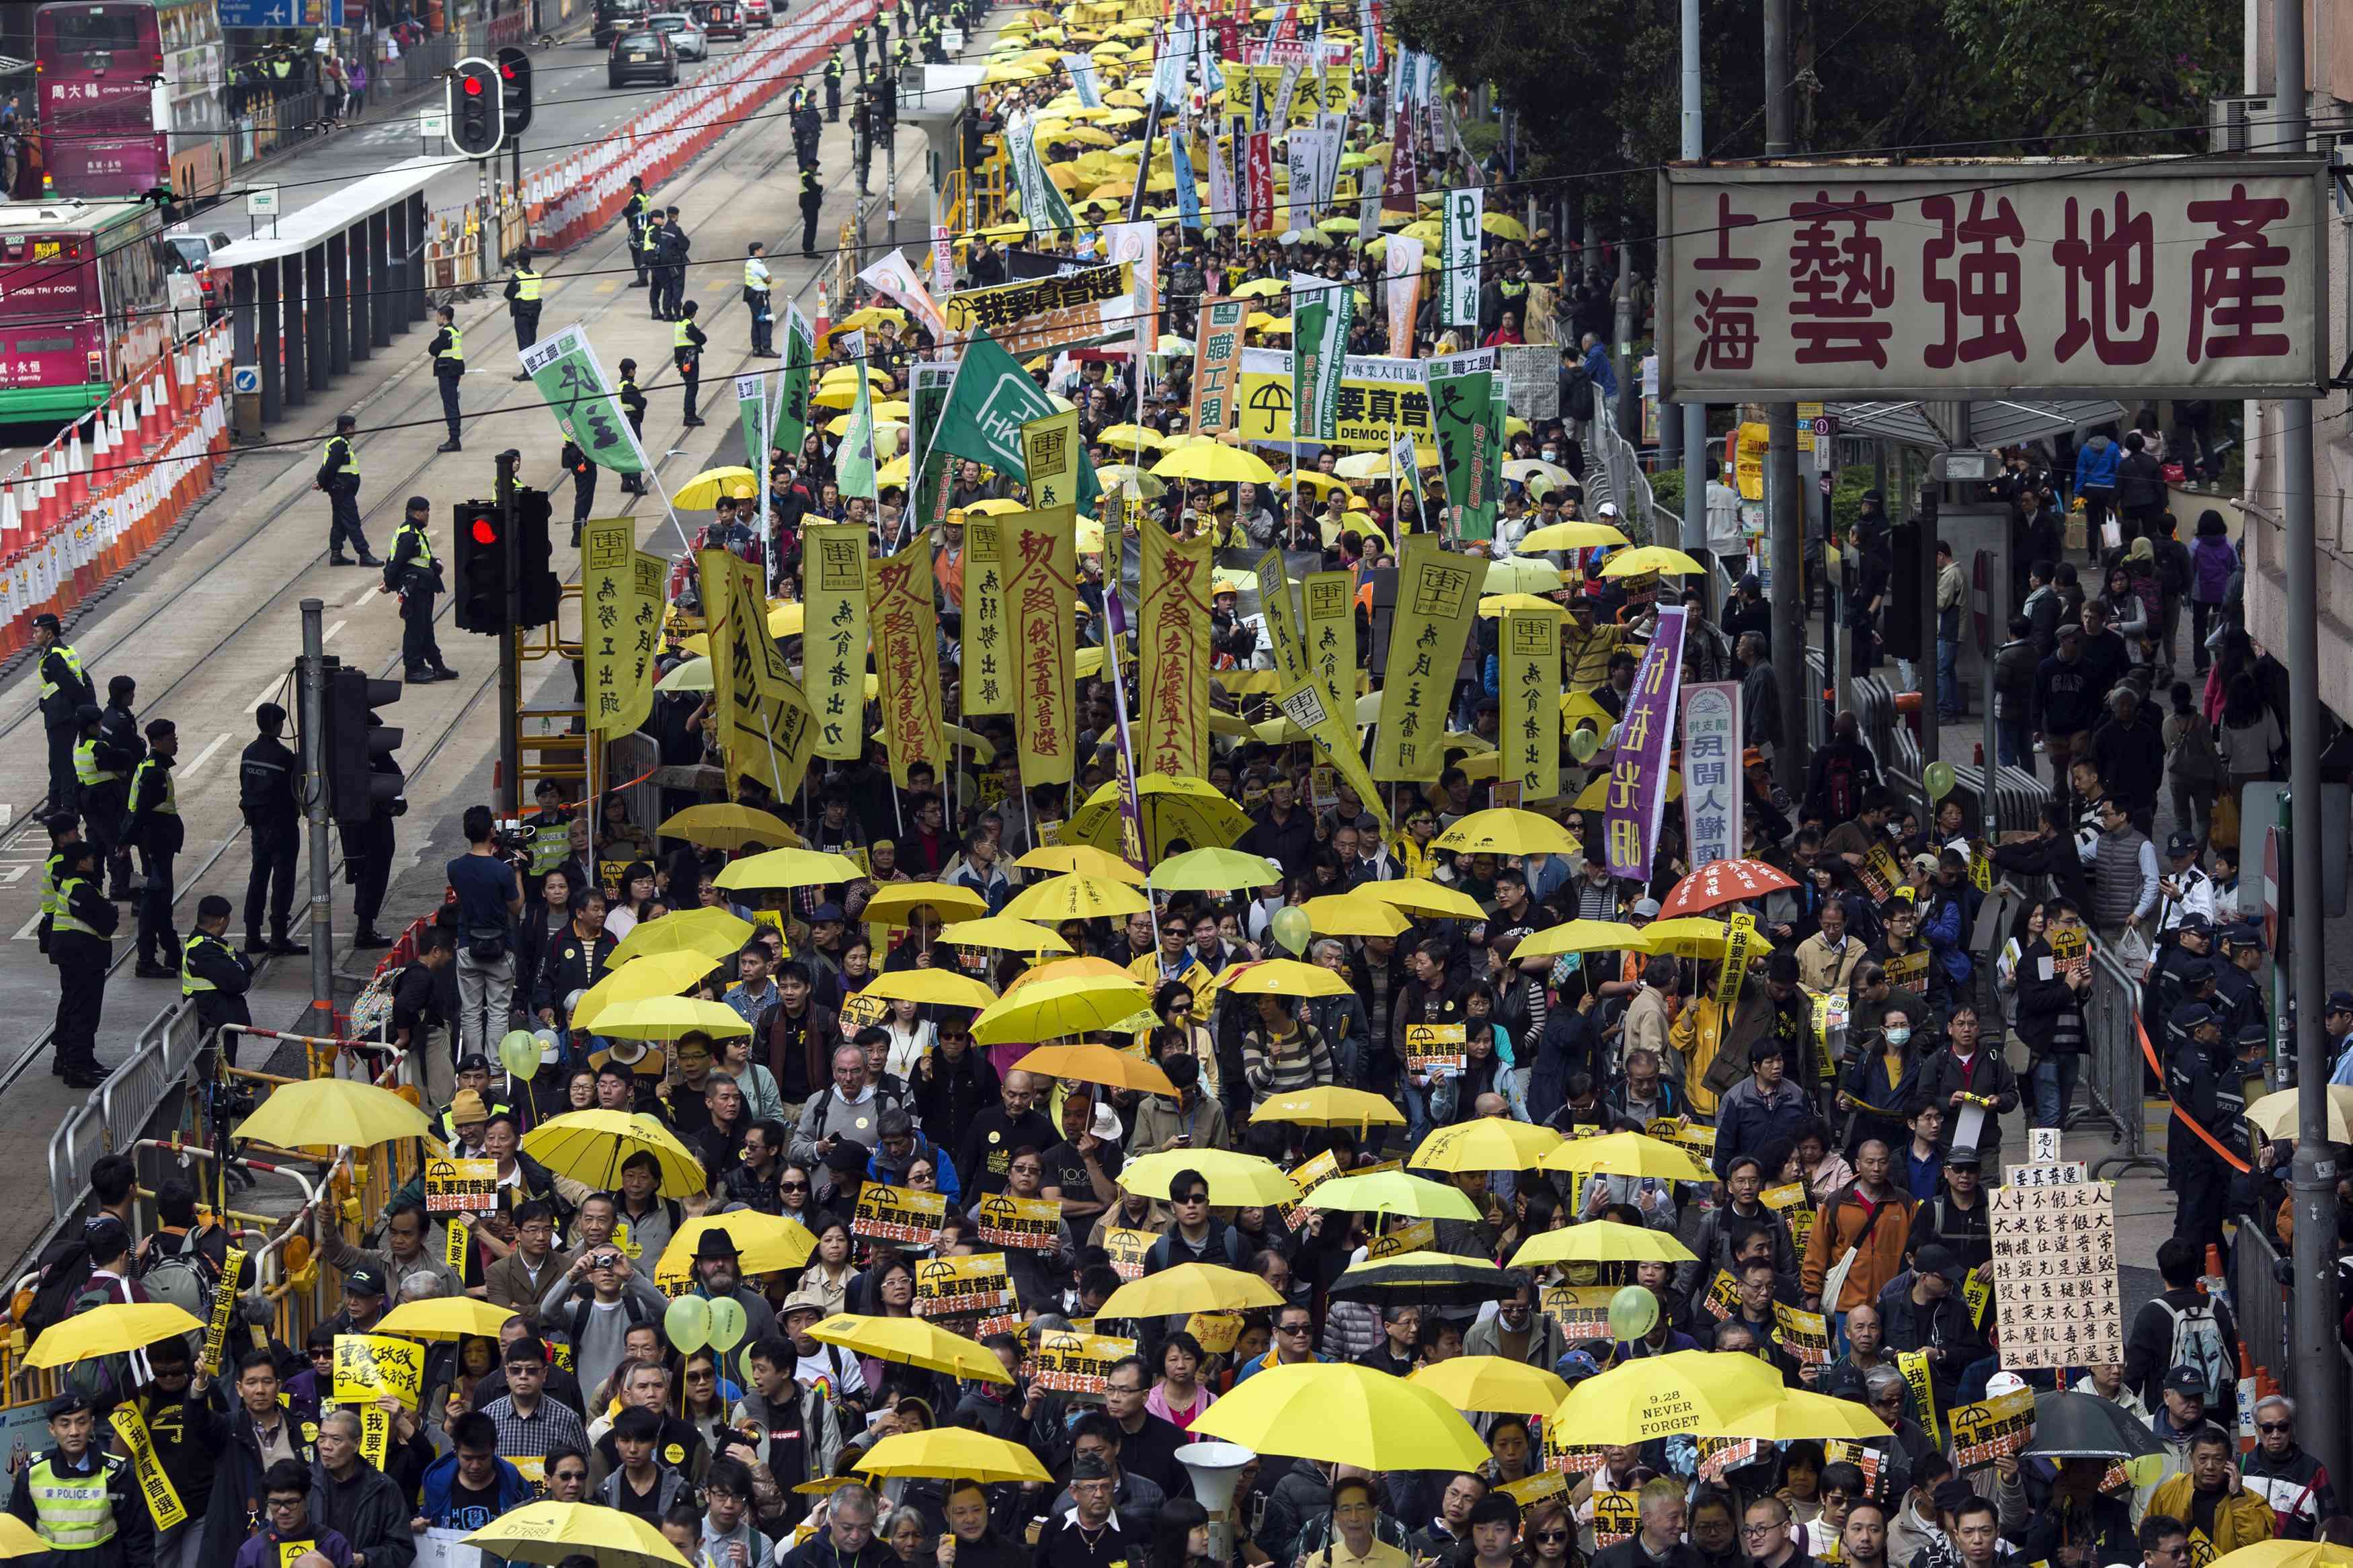 Thousands of pro-democracy protesters hold up yellow umbrellas, symbols of the Occupy movement, as they march to demand universal suffrage for Hong Kong, on February 1 last year. Photo: Reuters